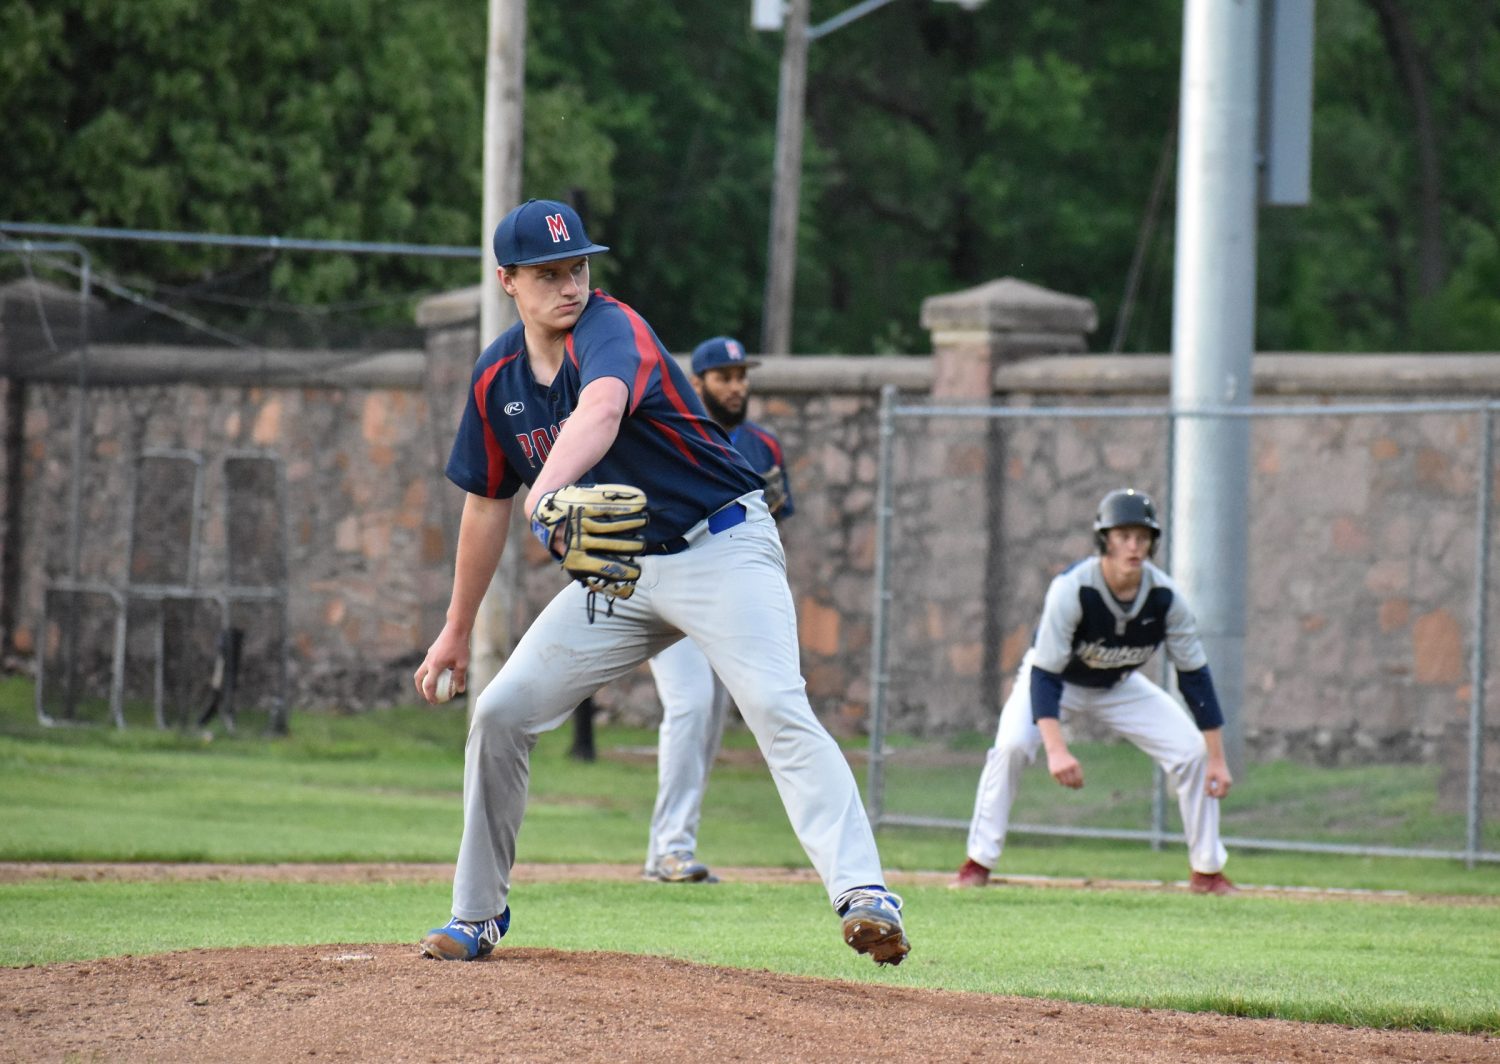 Late inning rally not enough as Post 46 falls to Wausau